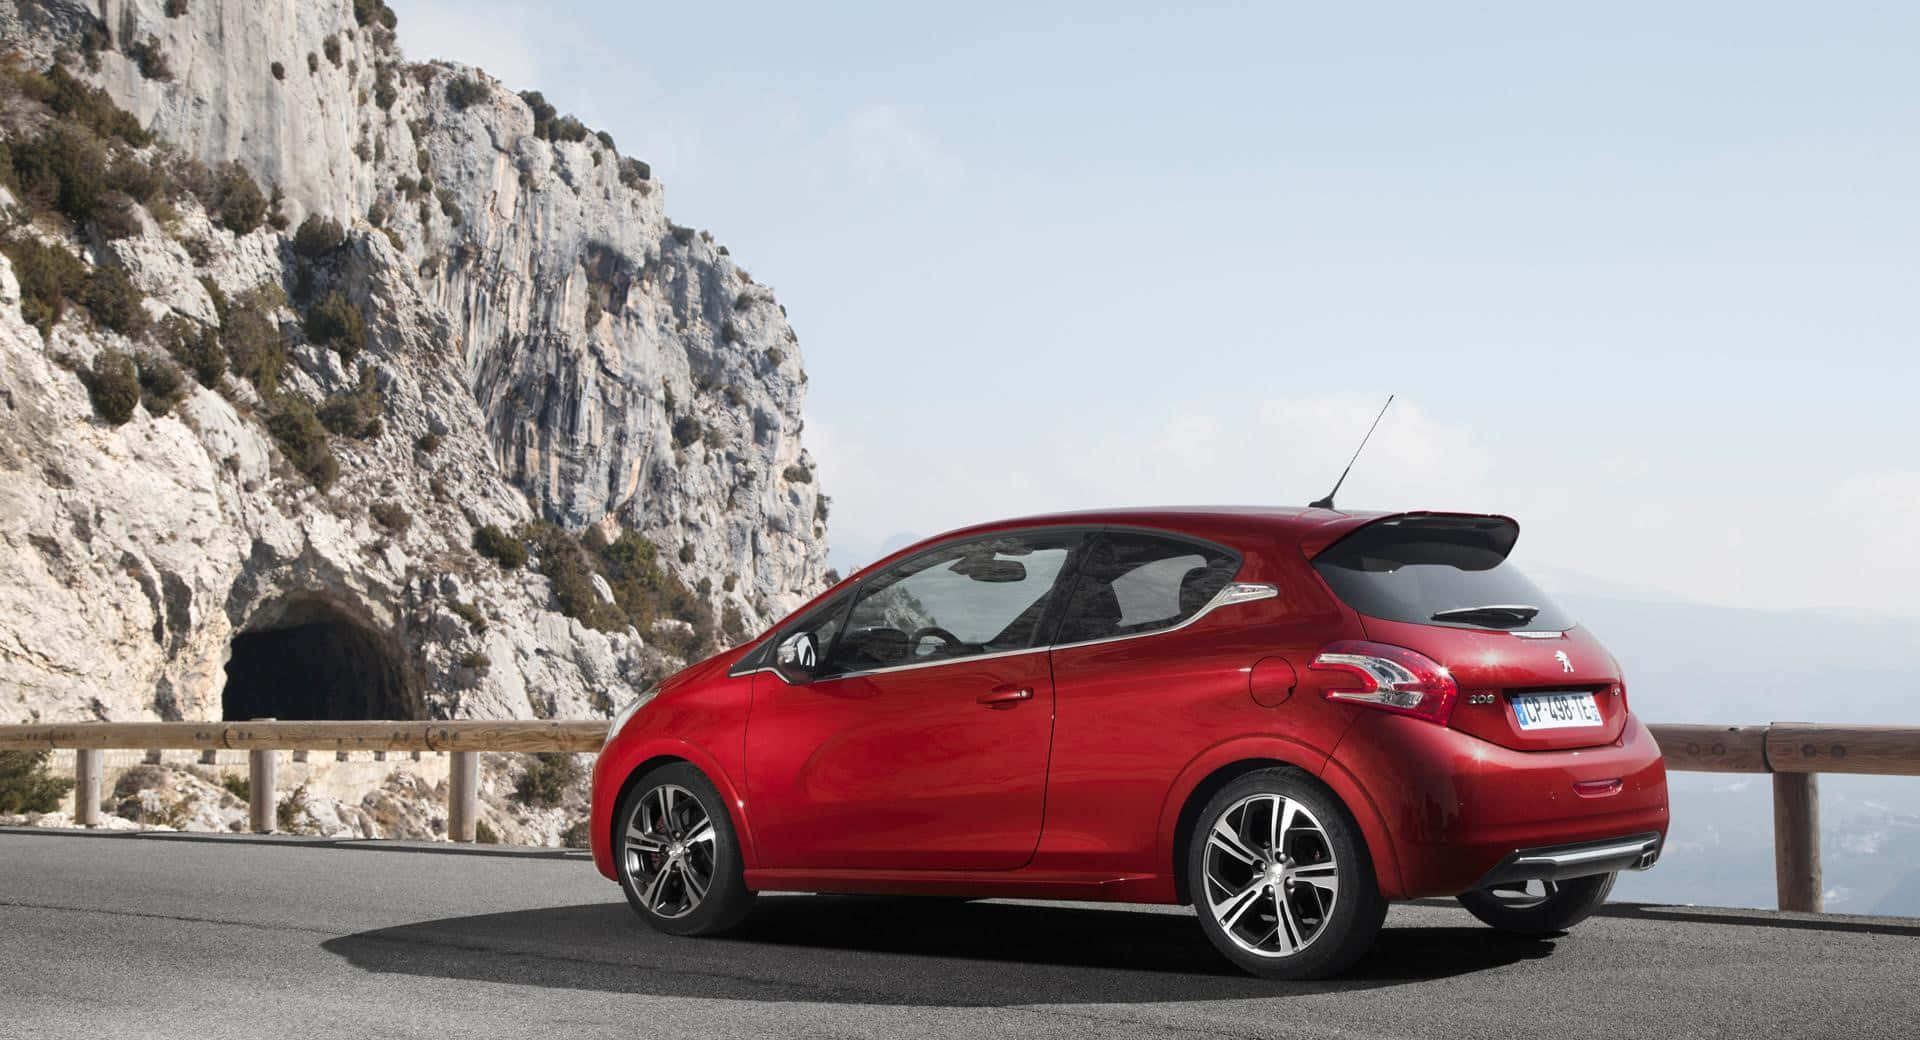 Sleek and Stylish Peugeot 208 in Pristine Condition Wallpaper